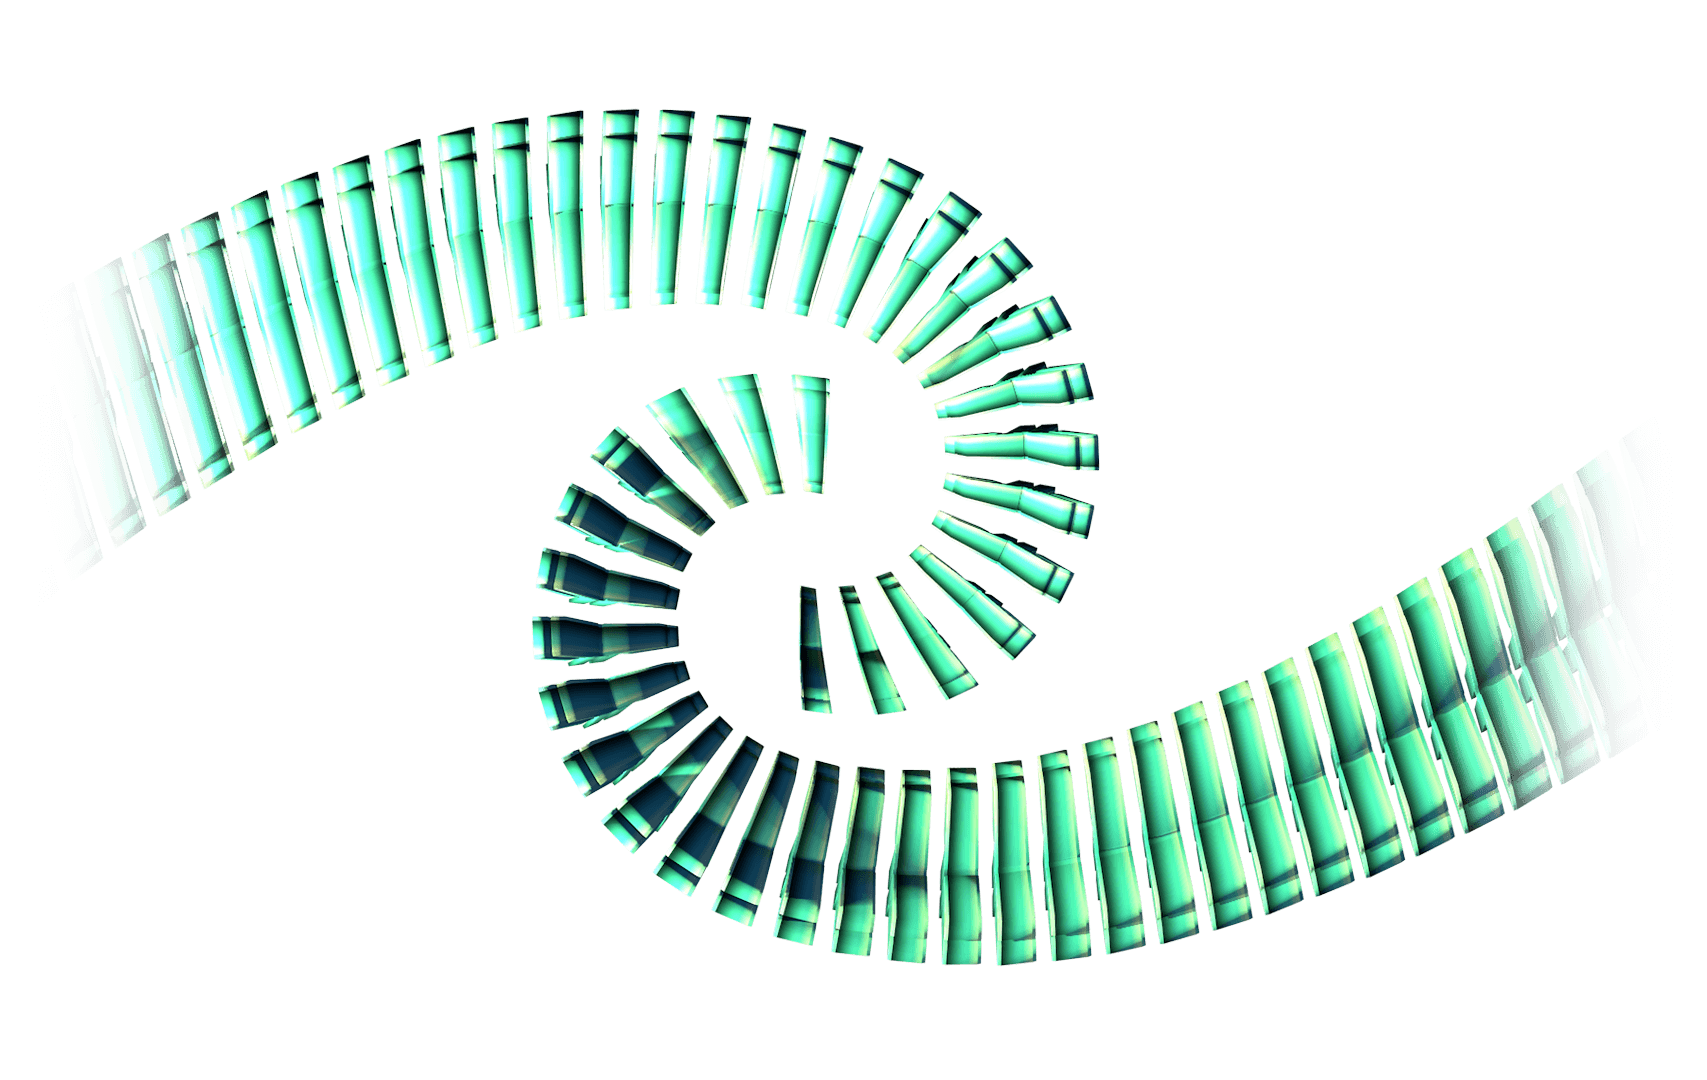 3D generated image of a green helix, representing Wheeler's capability as a cell banking and protein expression company